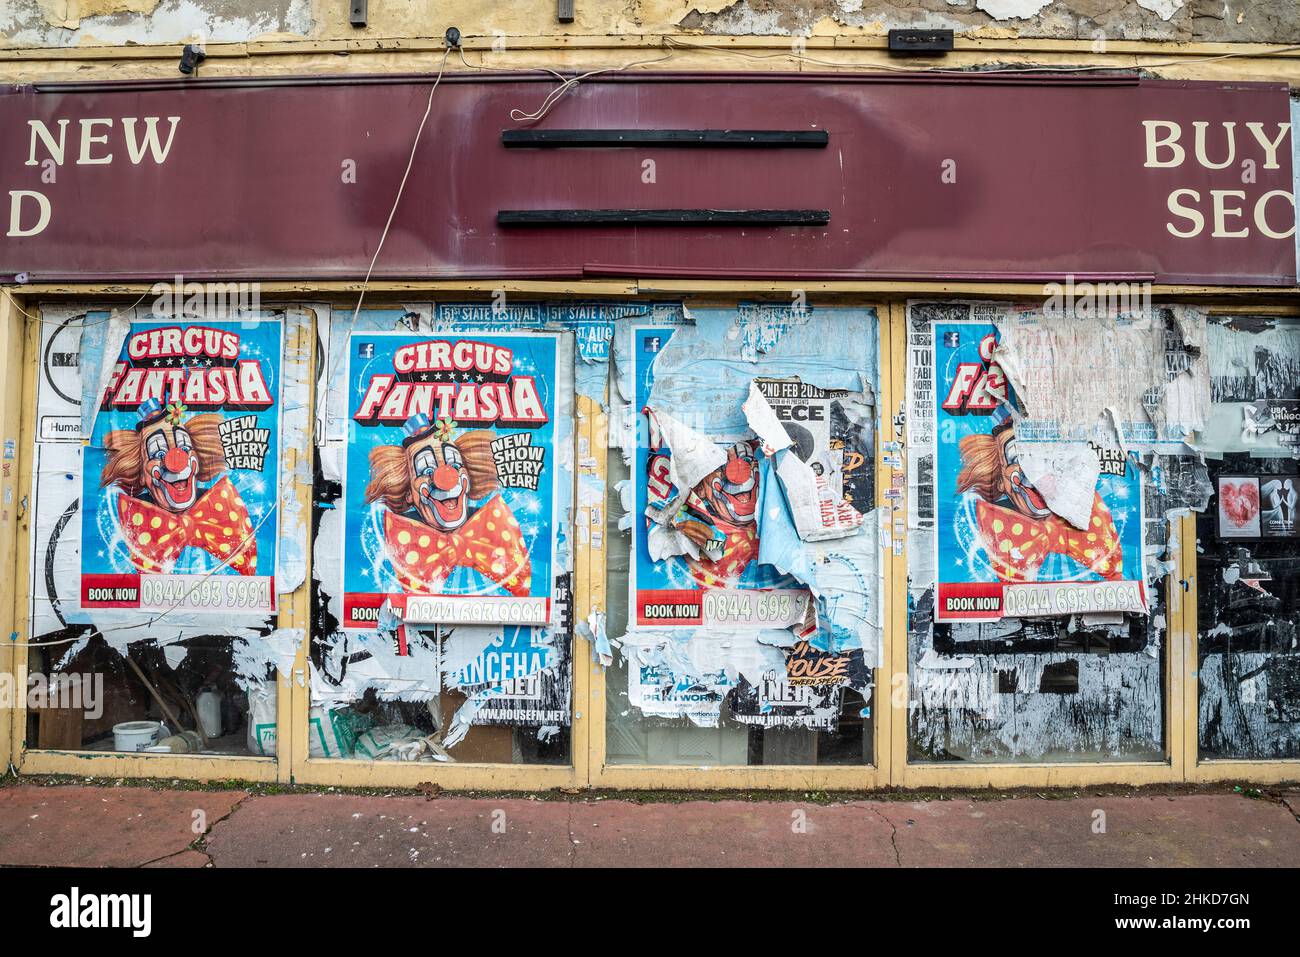 Closed shop. Boarded up former second hand store with ripped and torn circus advertising posters. Decaying building with bill stickers. Clown image Stock Photo